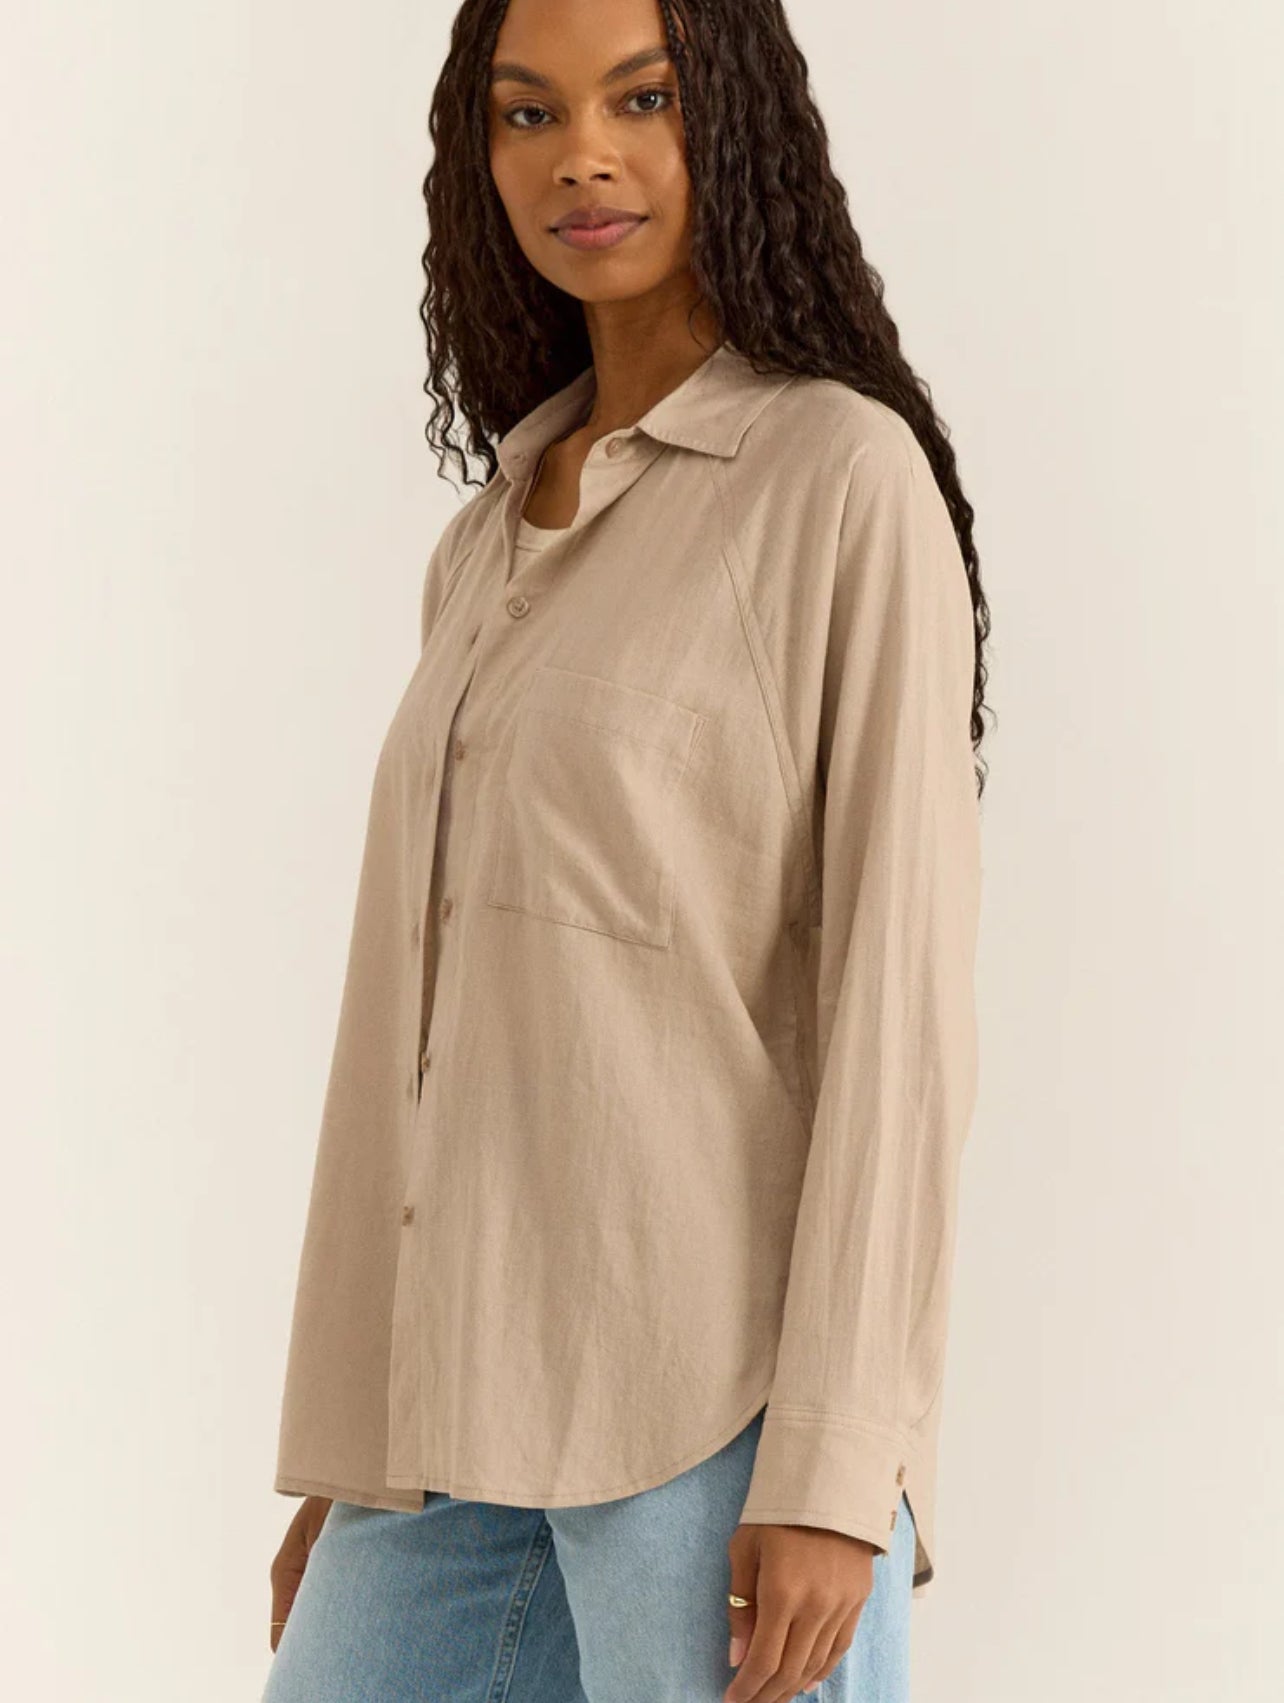 PERFECT LINEN TOP BY Z SUPPLY